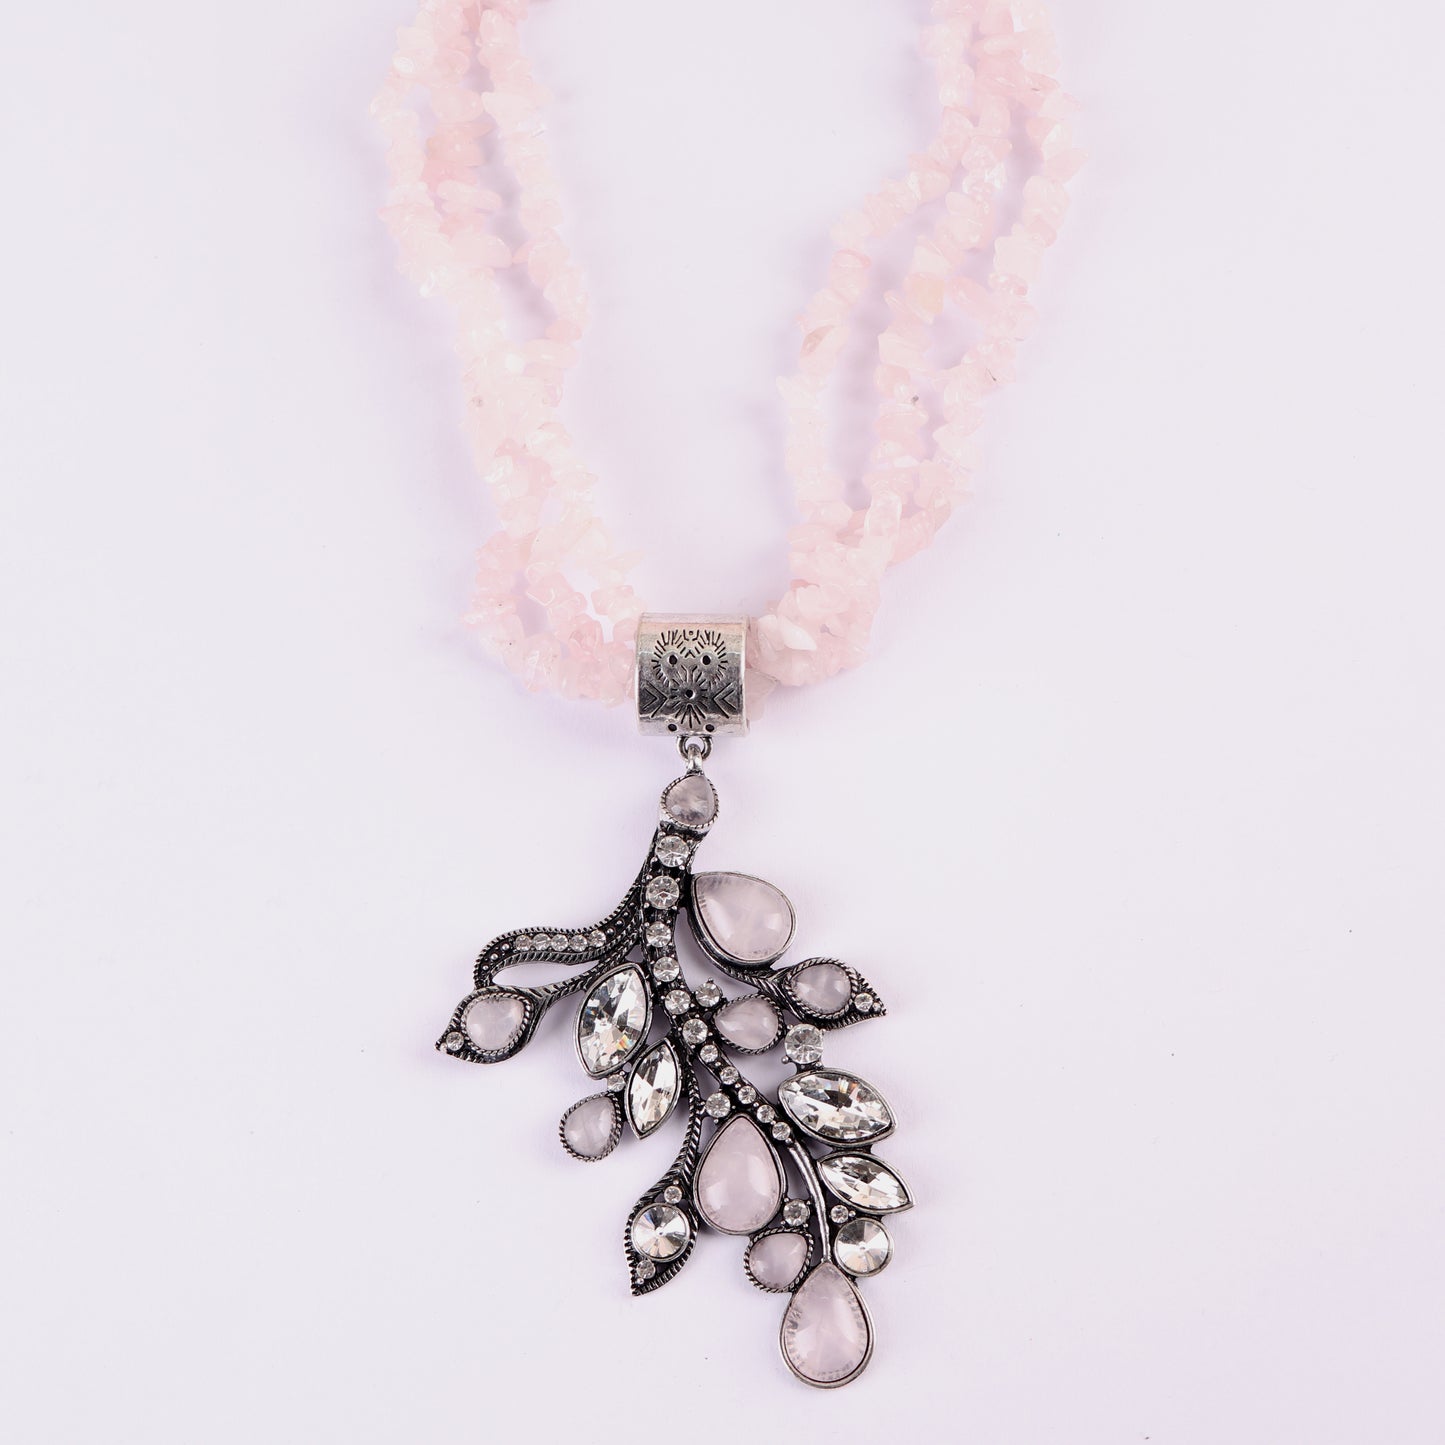 Necklace,Beaded Pink Necklace with Leaf Pendant - Cippele Multi Store